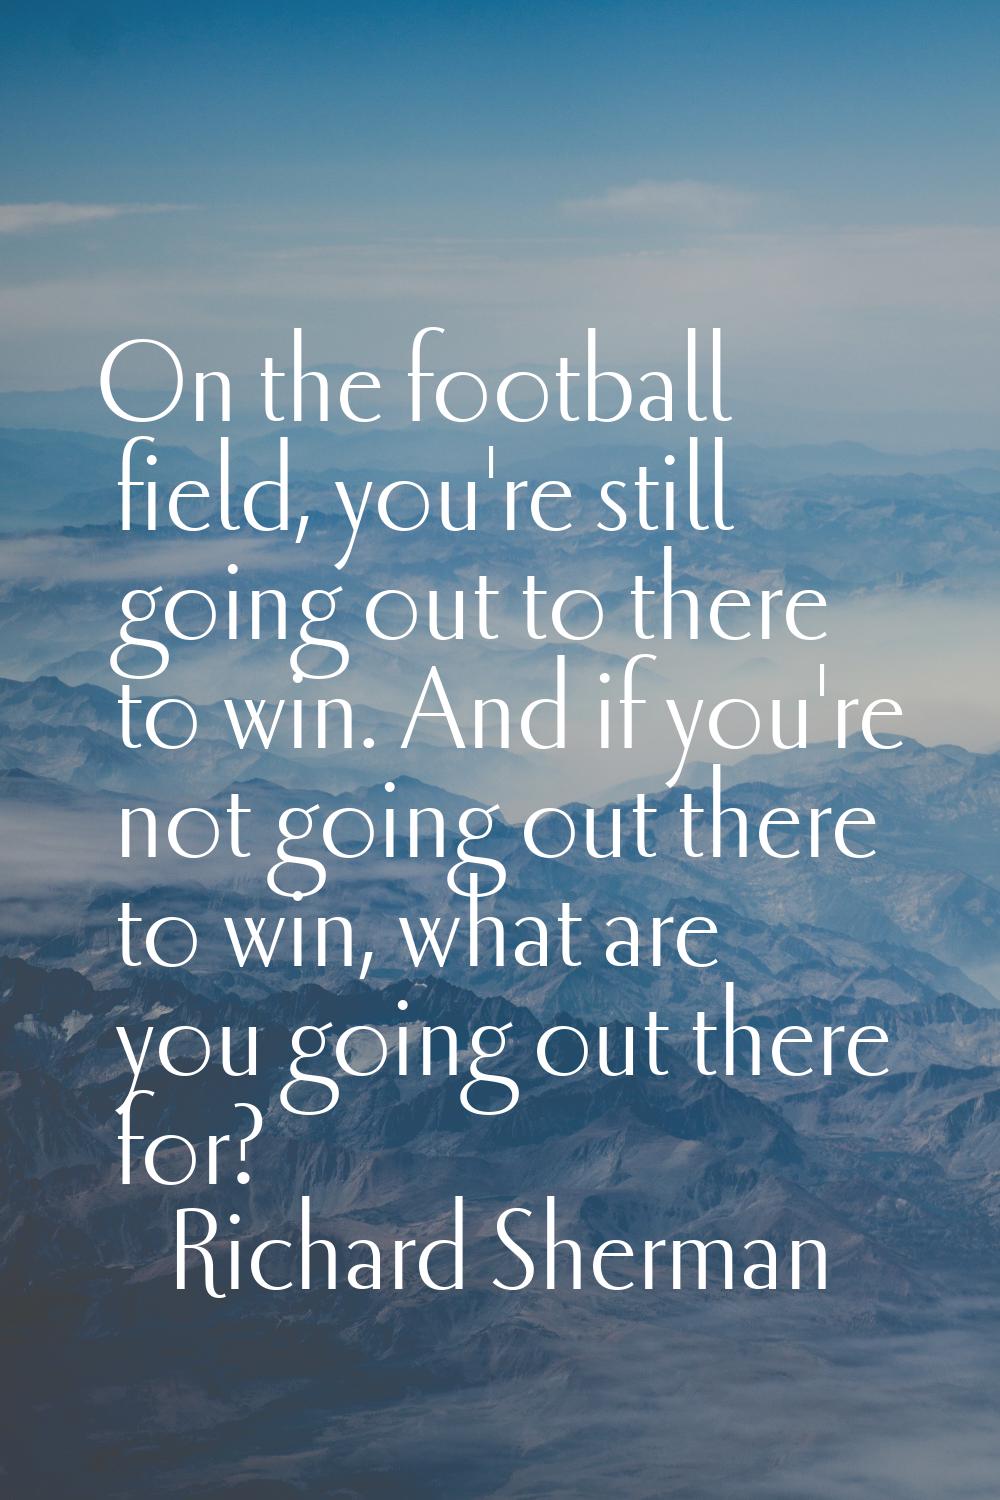 On the football field, you're still going out to there to win. And if you're not going out there to